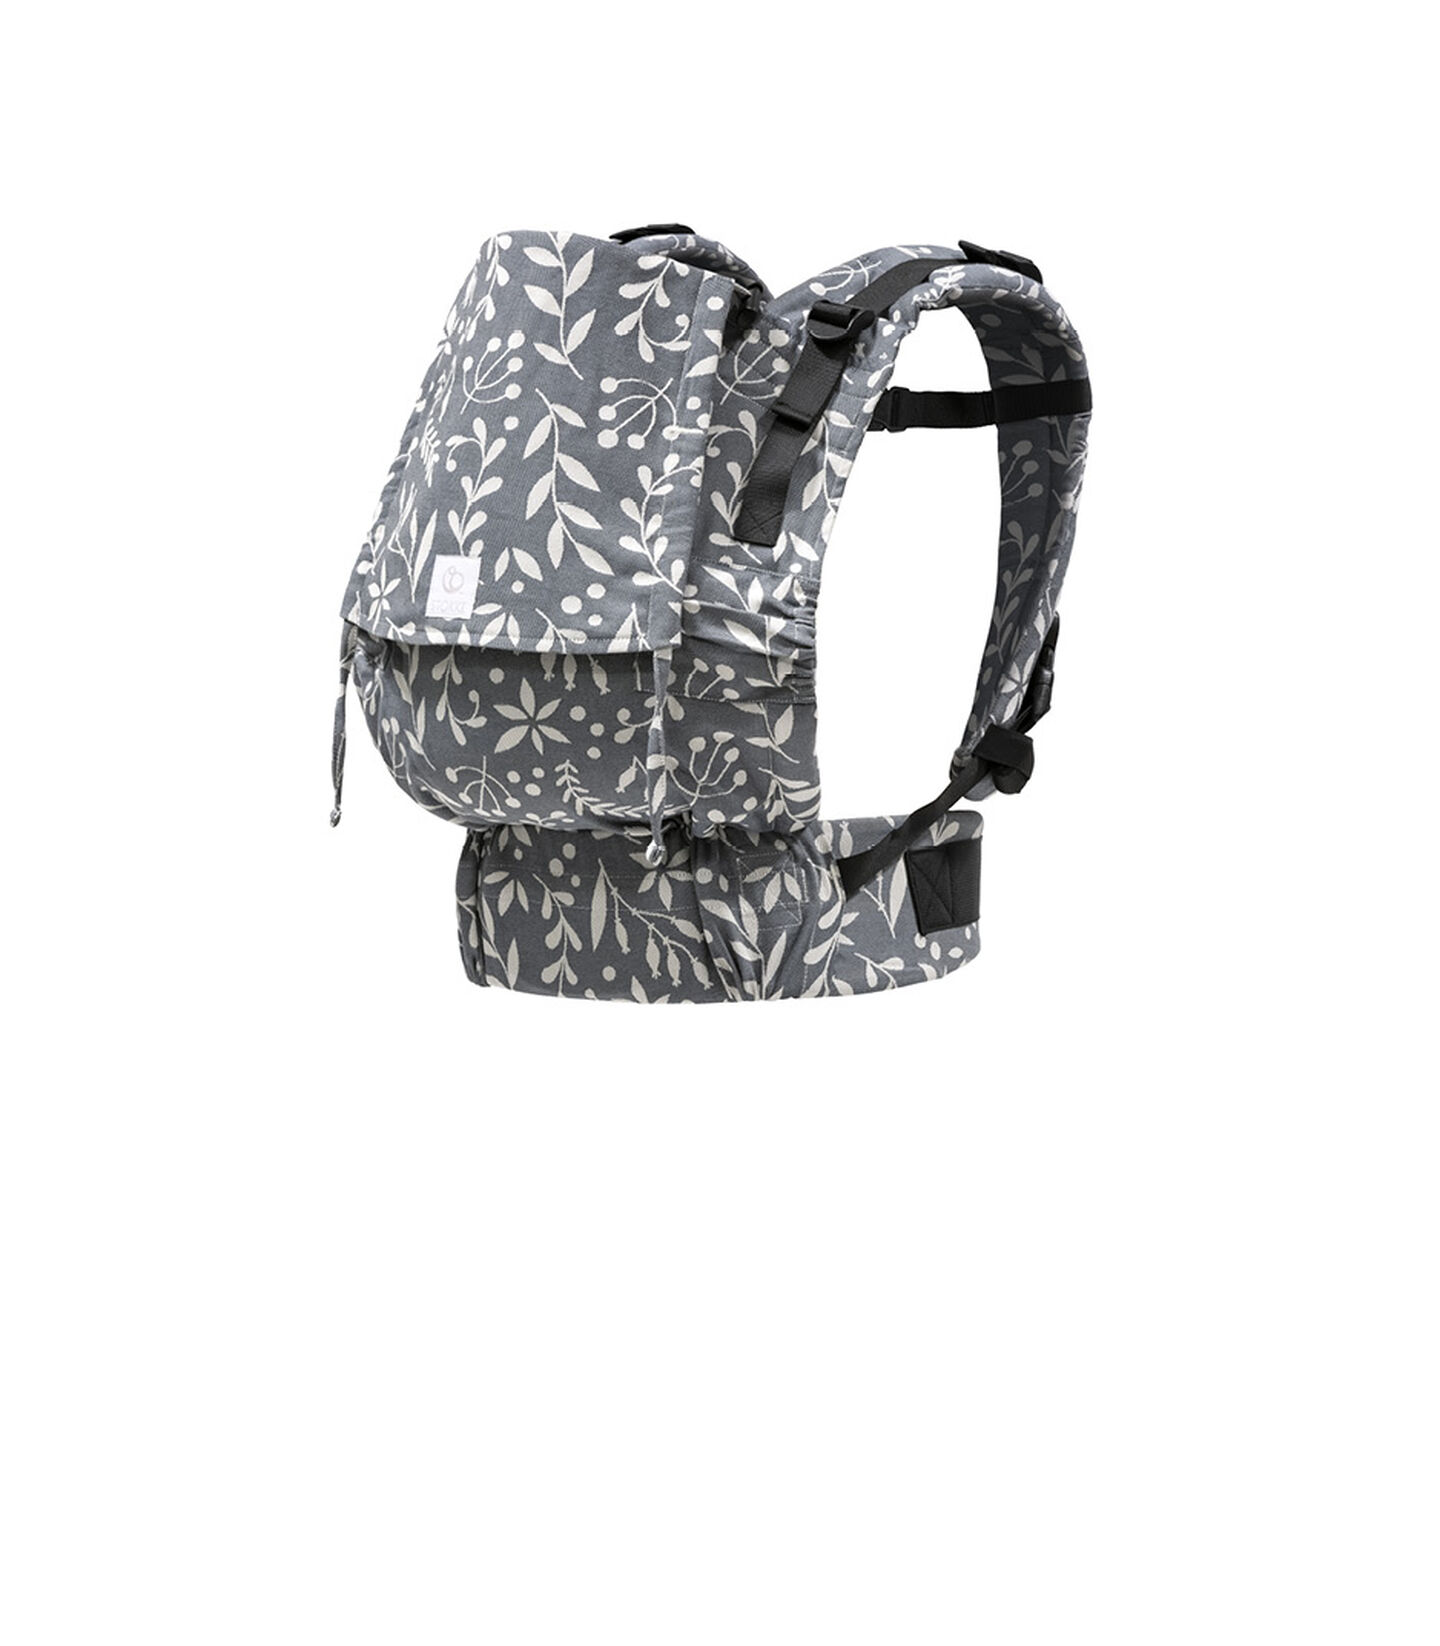 Stokke® Limas™ babydrager Flex Floral Slate, Floral Slate, mainview view 1